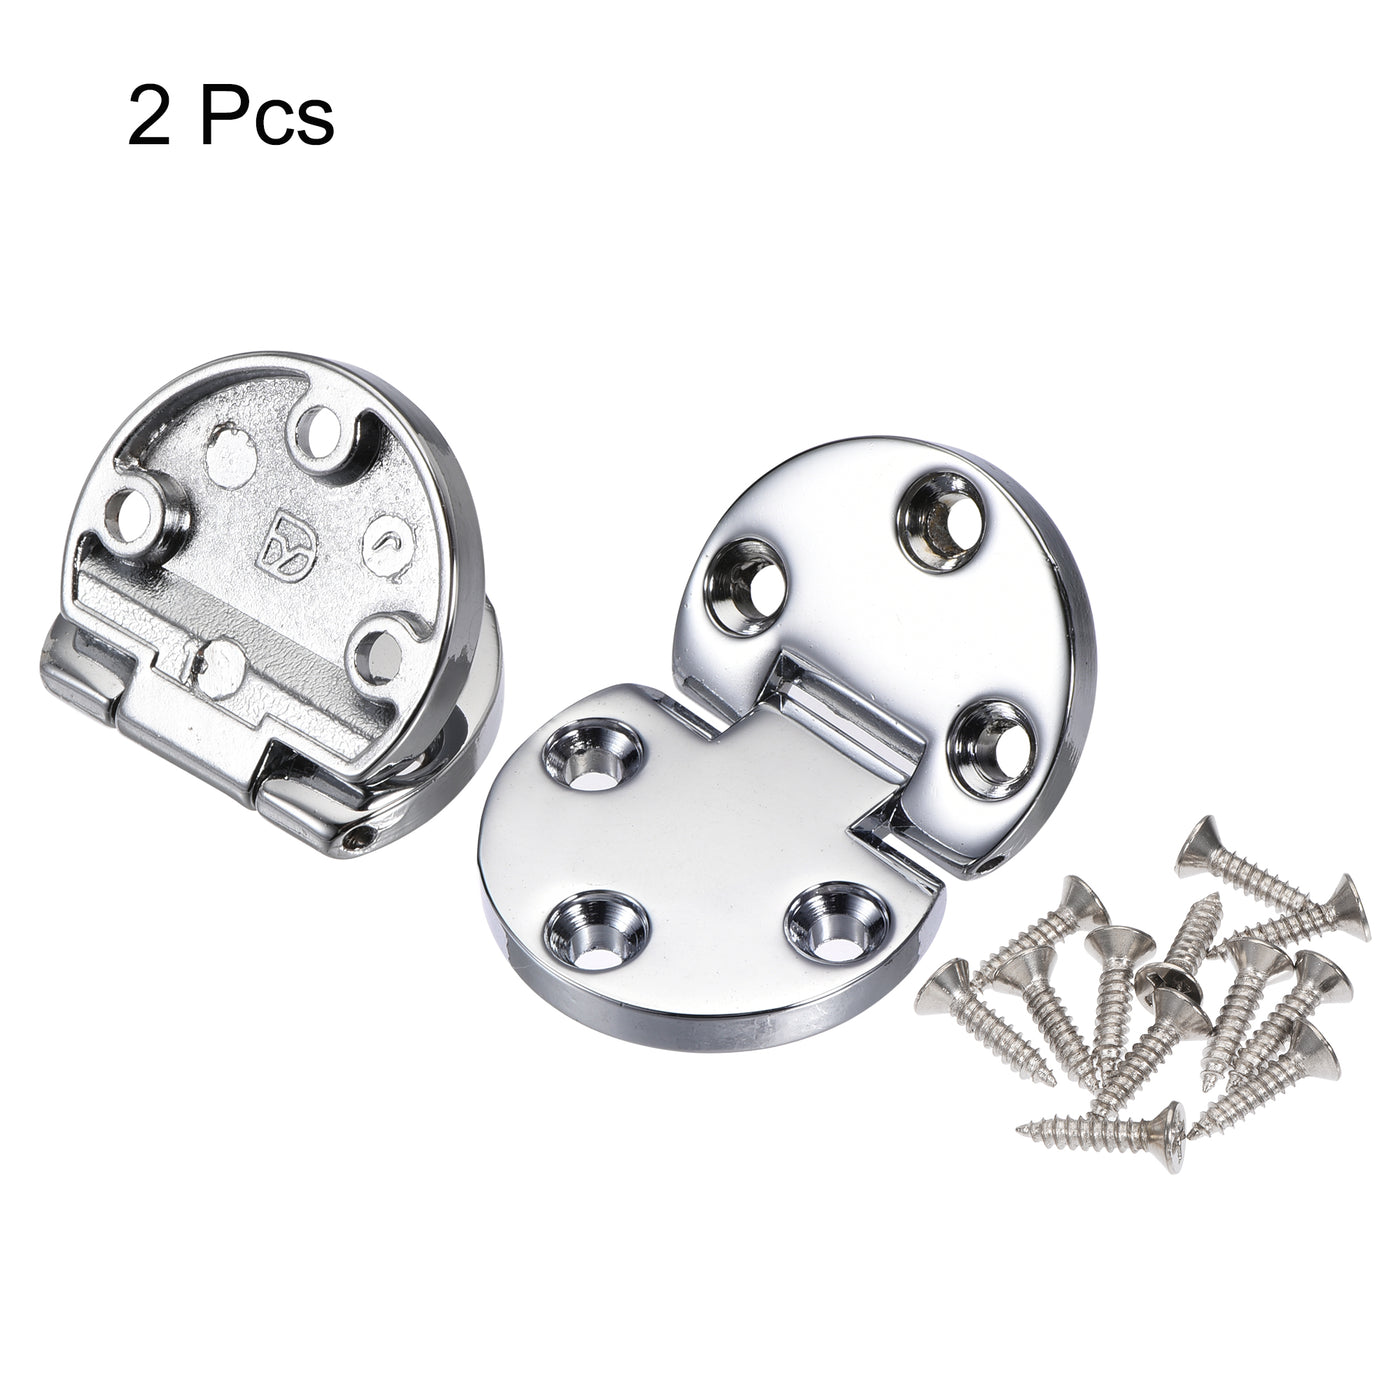 uxcell Uxcell 1.85x1.16inch Flip Hinges 90 Degree for Sewing Machine Folding Table with Screws Zinc Alloy Silver Tone 2Pcs